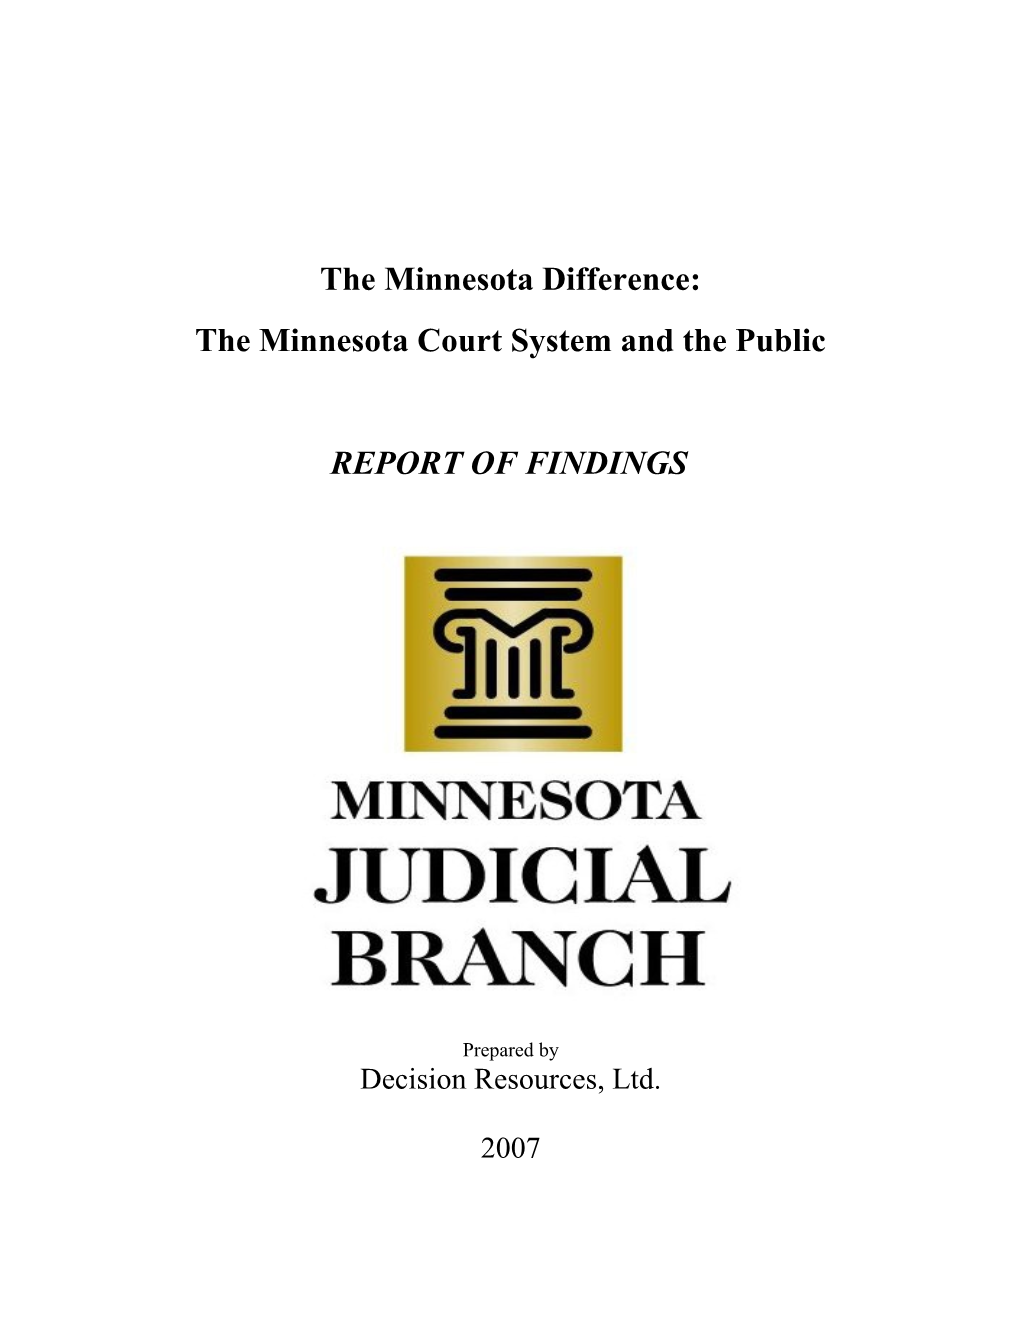 The Minnesota Court System and the Public